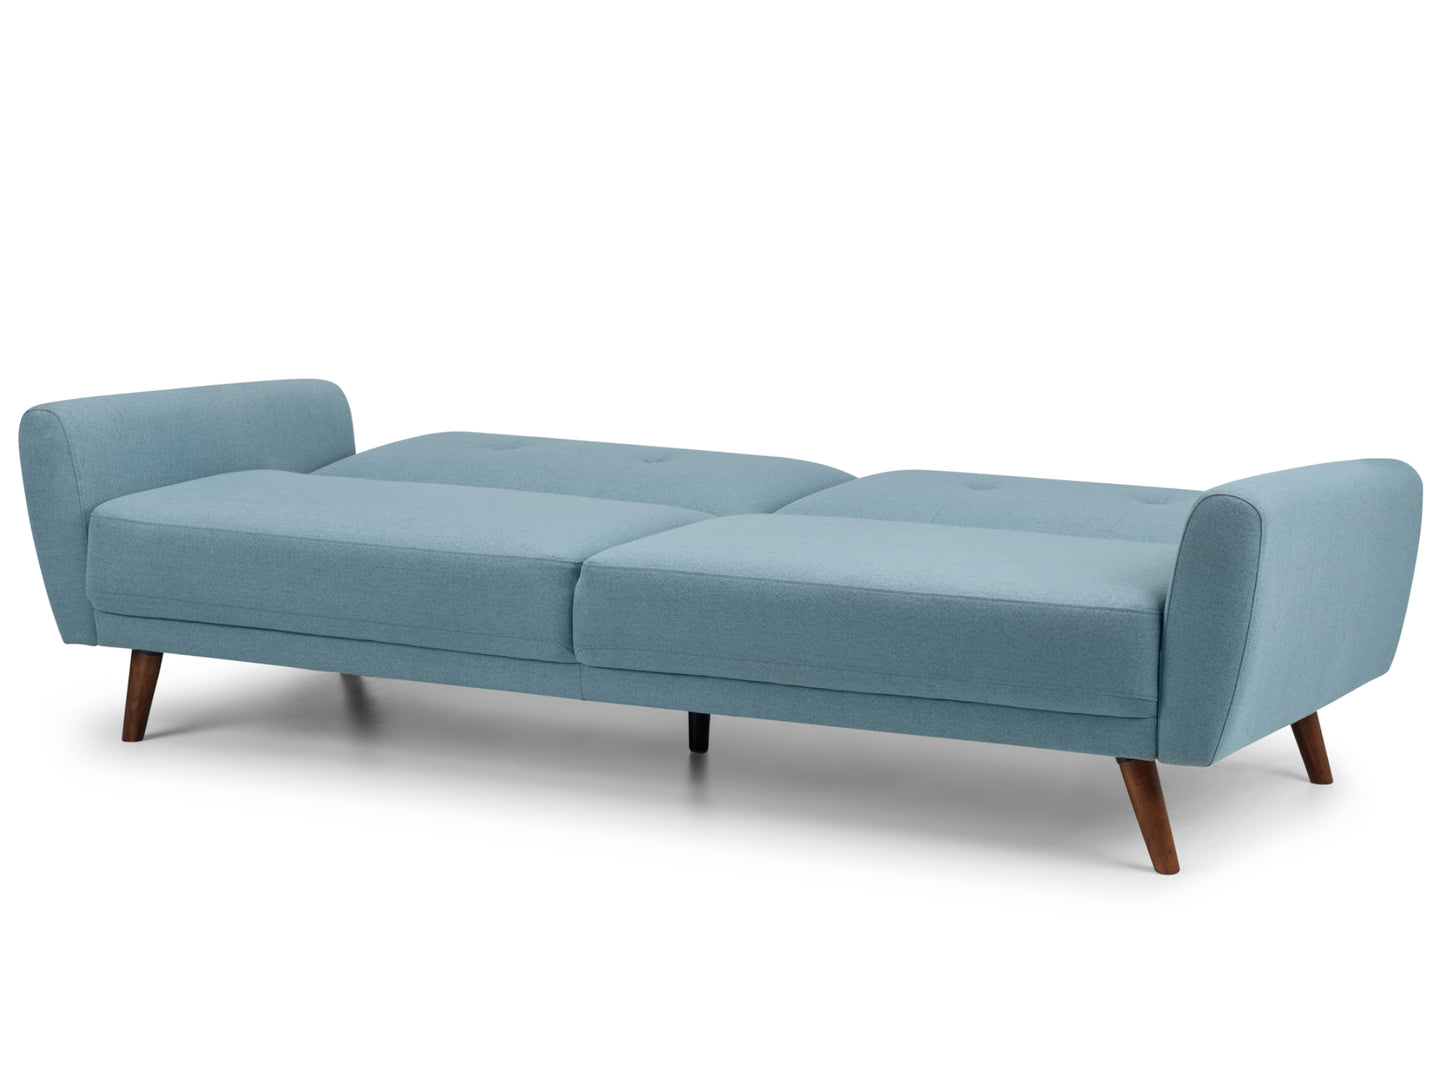 Monza Sofa and Sofa Bed in Blue Fabric